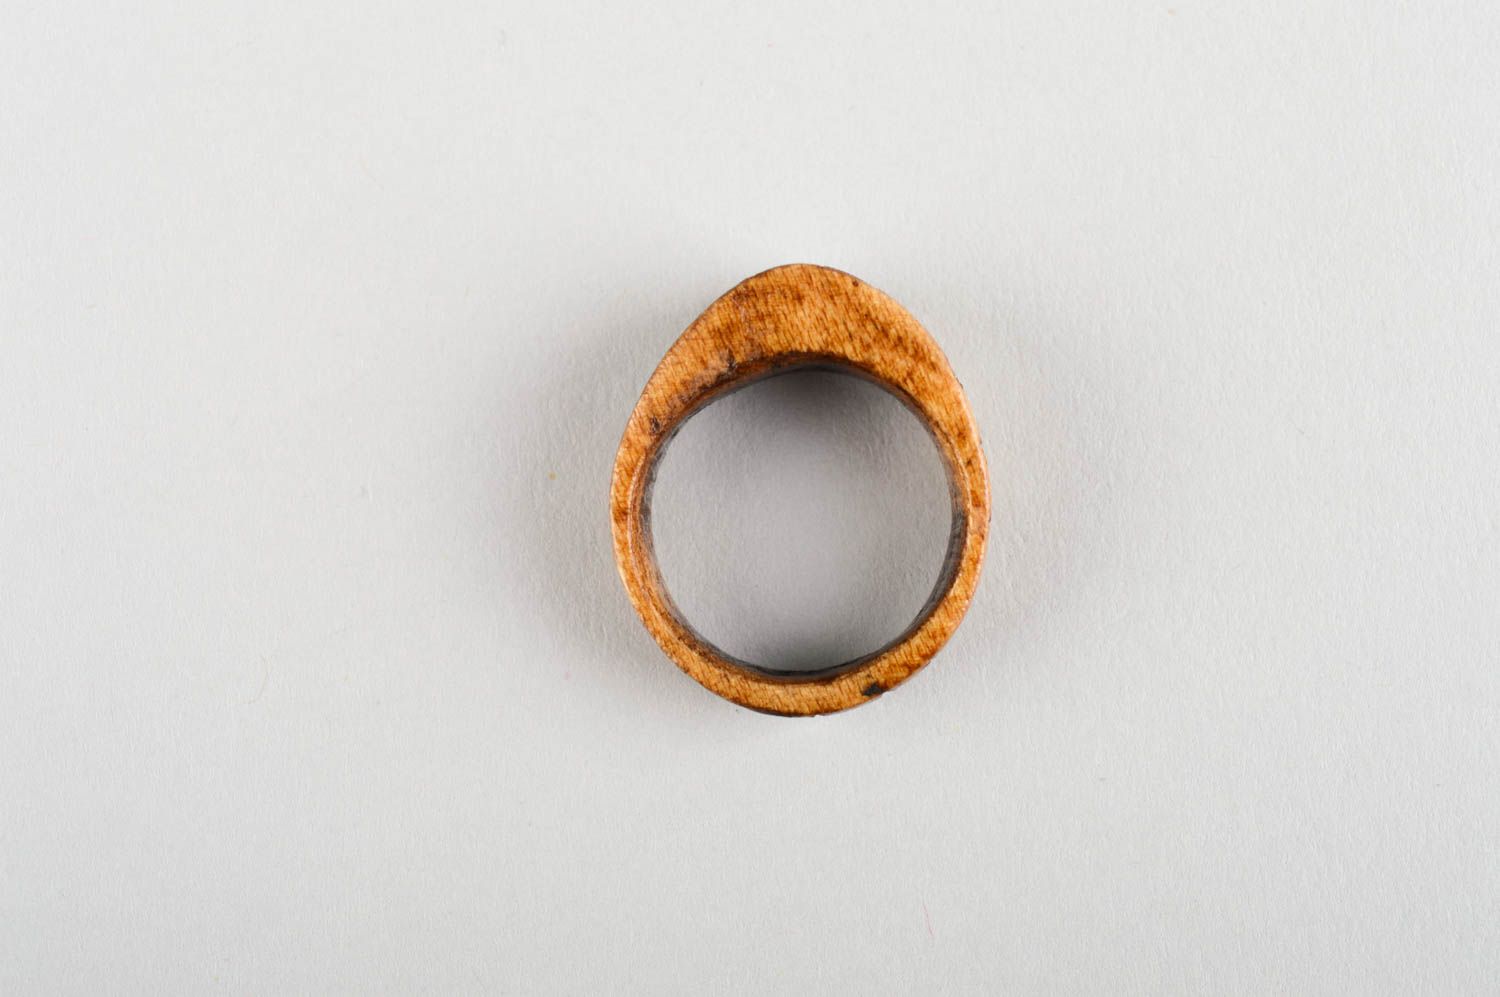 Unusual handmade wooden ring fashion accessories wood craft gifts for her photo 5